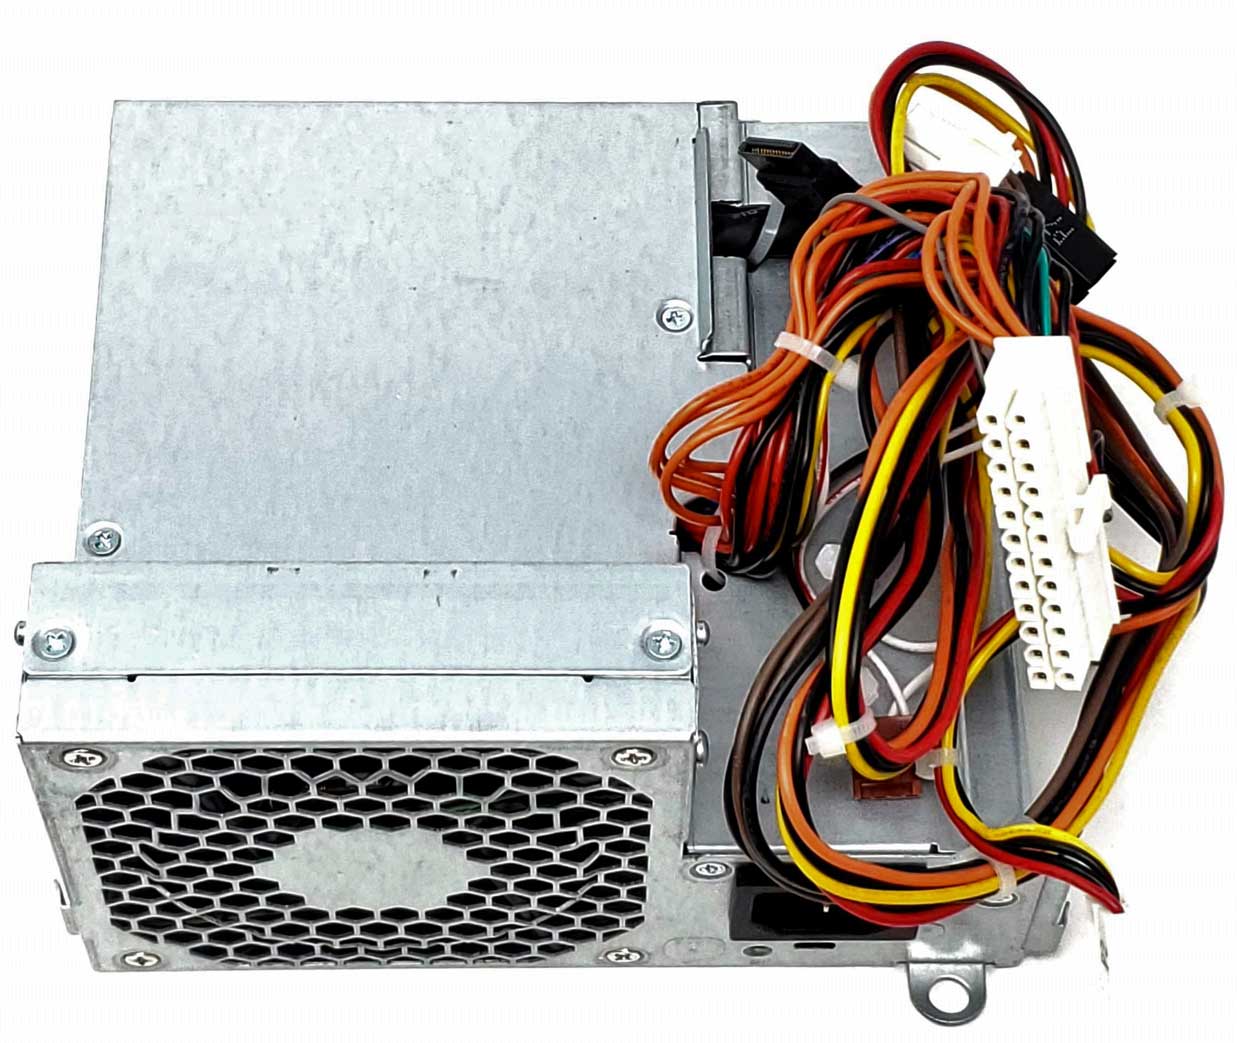 HP 455324-001 - 240W Power Supply for DC5800 DC5850 DC7900 SFF